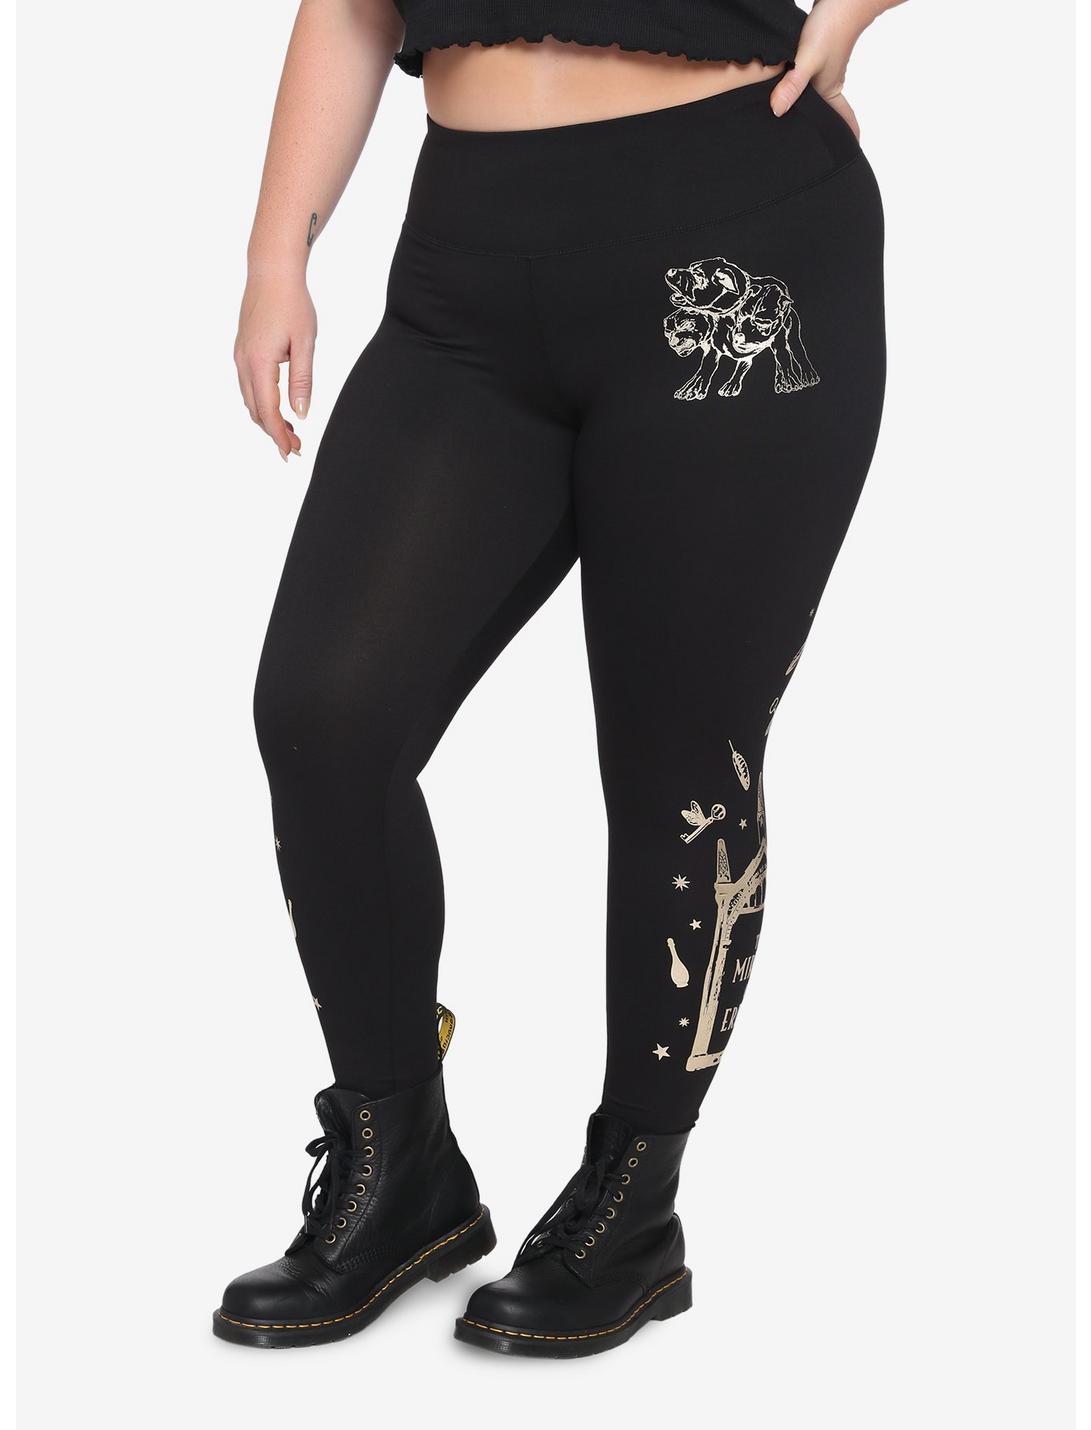 Harry Potter Underground Chambers Trials Leggings Plus Size, GOLD, hi-res